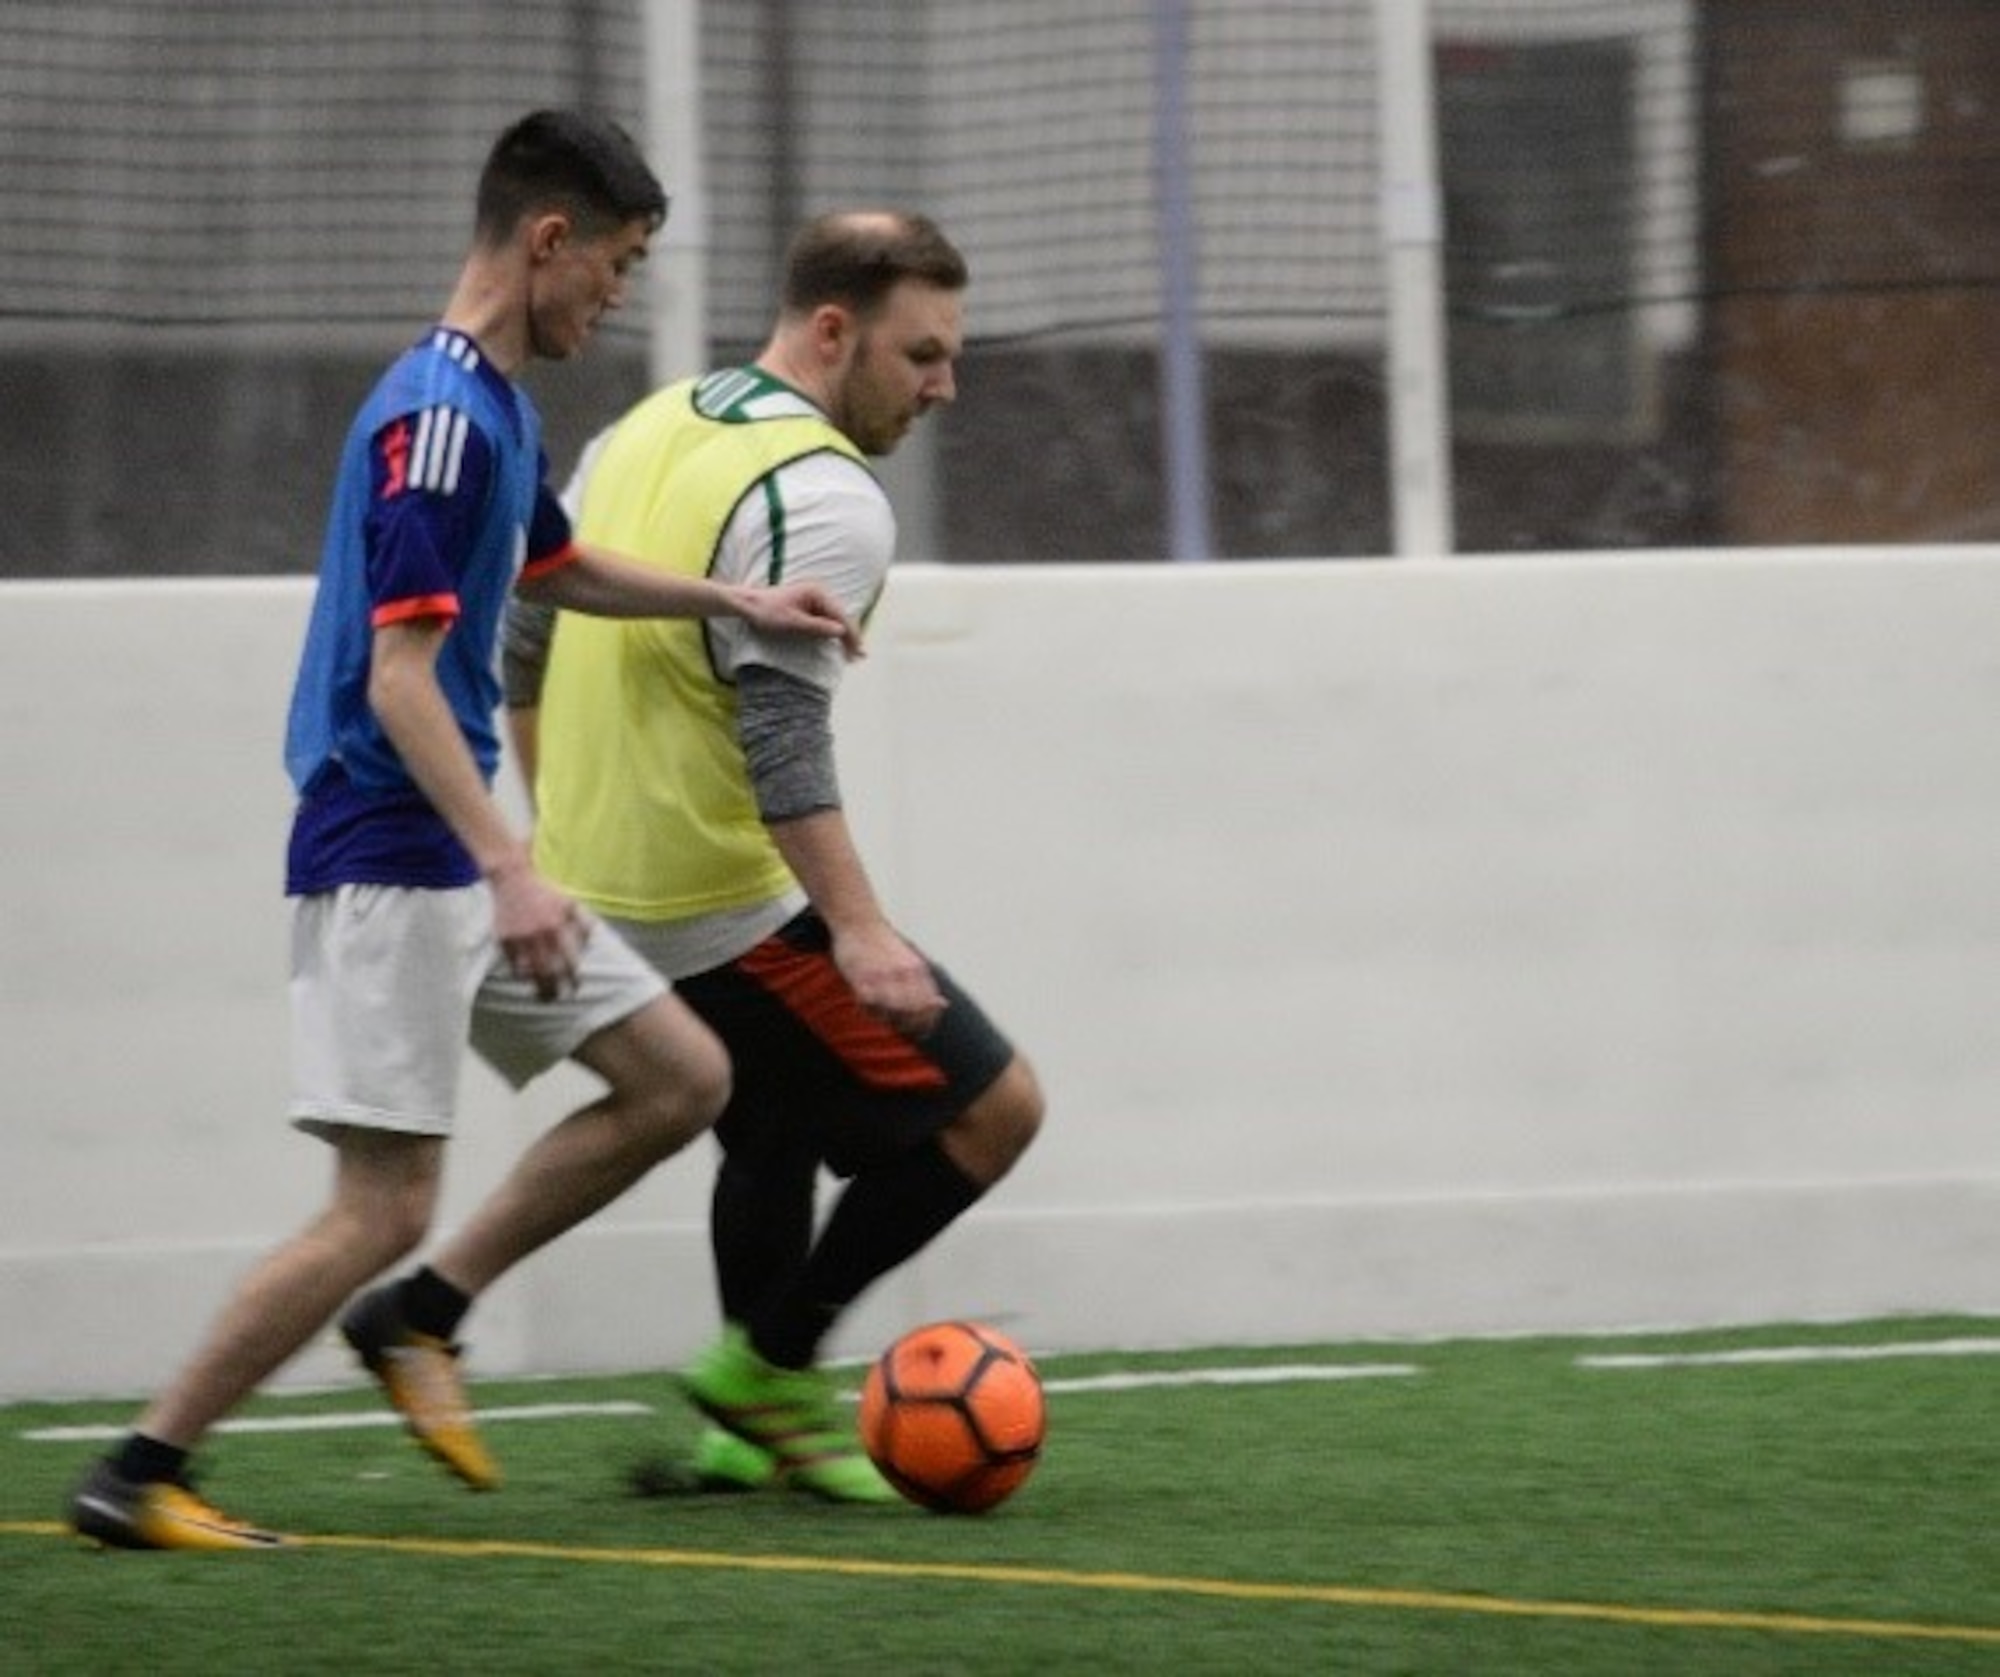 Senior Airman Jordan Combs, a 28th Bomb Wing administration journeyman, dribbles a soccer ball past a defender at Ellsworth Air Force Base, S.D., March 7, 2018. Intramural sports provide an outlet for Airmen to stay active and socialize with others around the base. (U.S. Air Force photo by Airman 1st Class Thomas Karol)